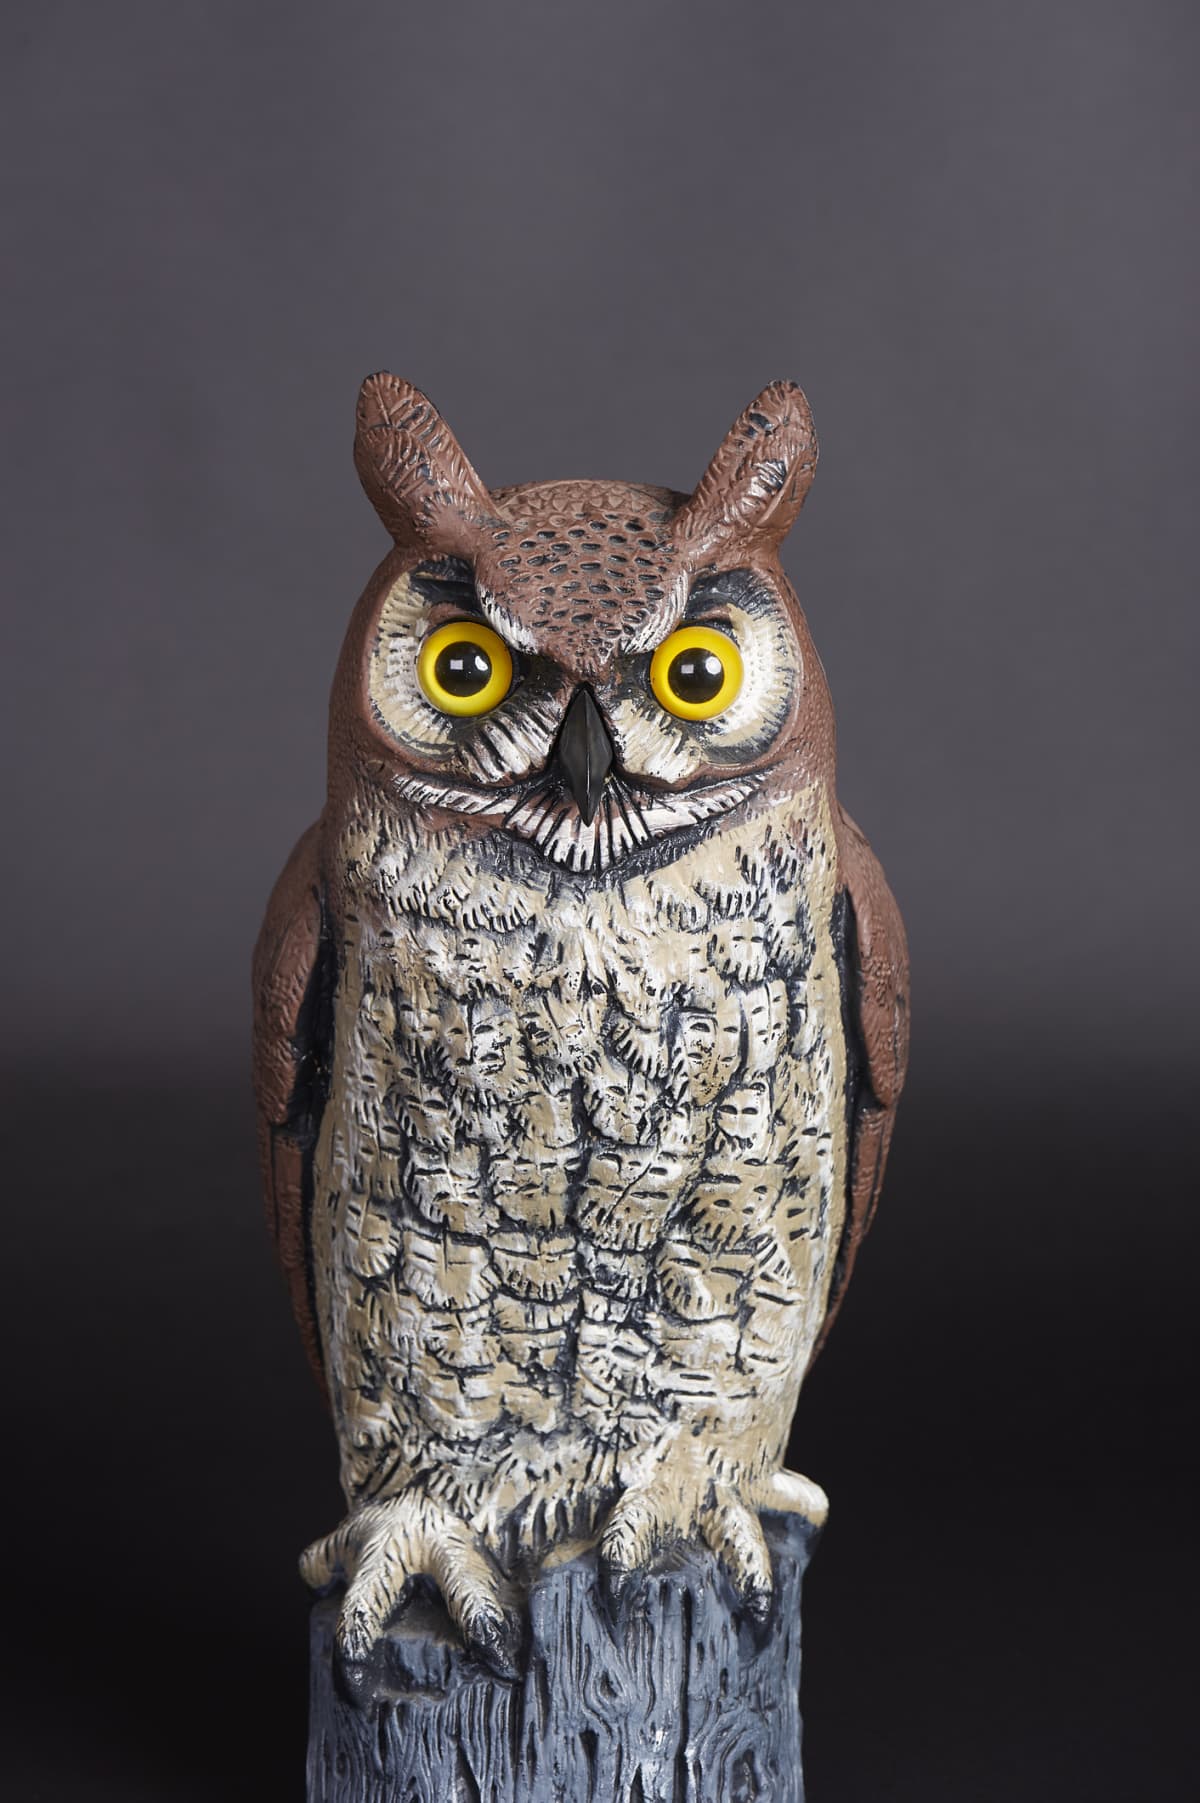 Plastic Great Horned Owl decoy used for scaring birds away